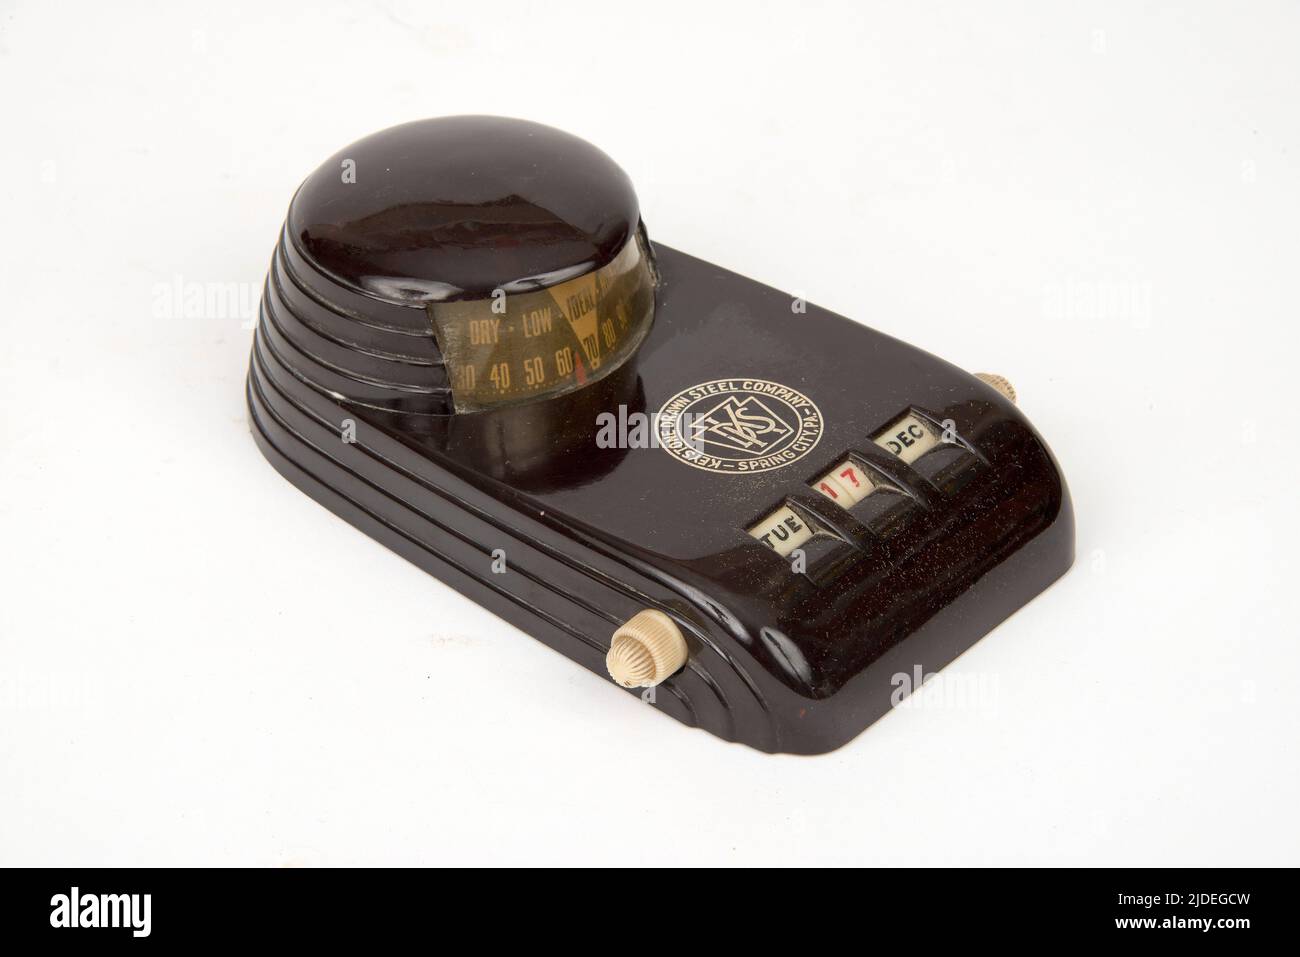 Bakelite and early plastic items. Stock Photo